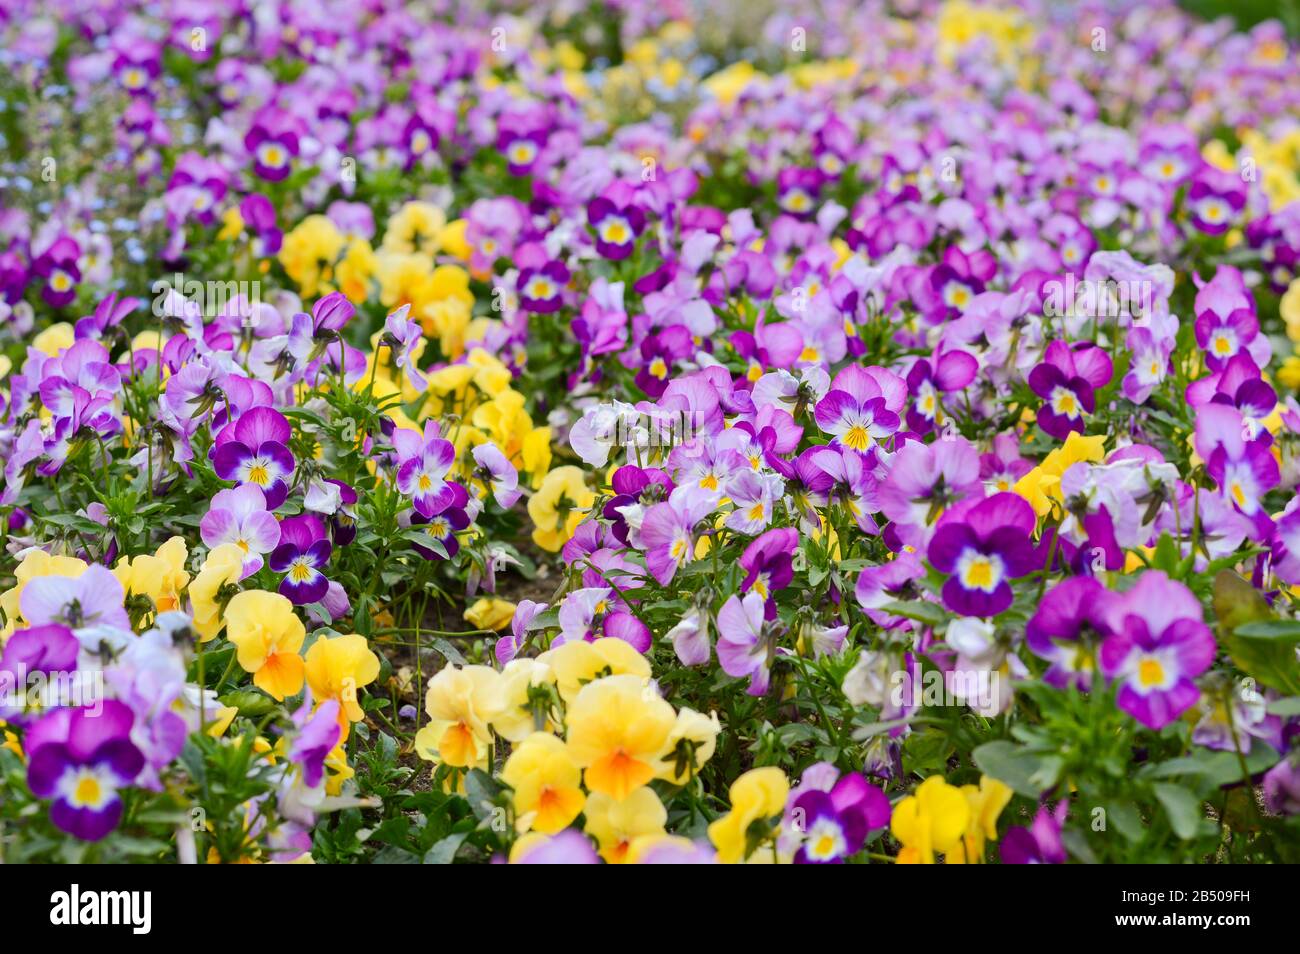 field of purple and yellow pansies, a festive decoration of the city with spring flowers planted in the park Stock Photo